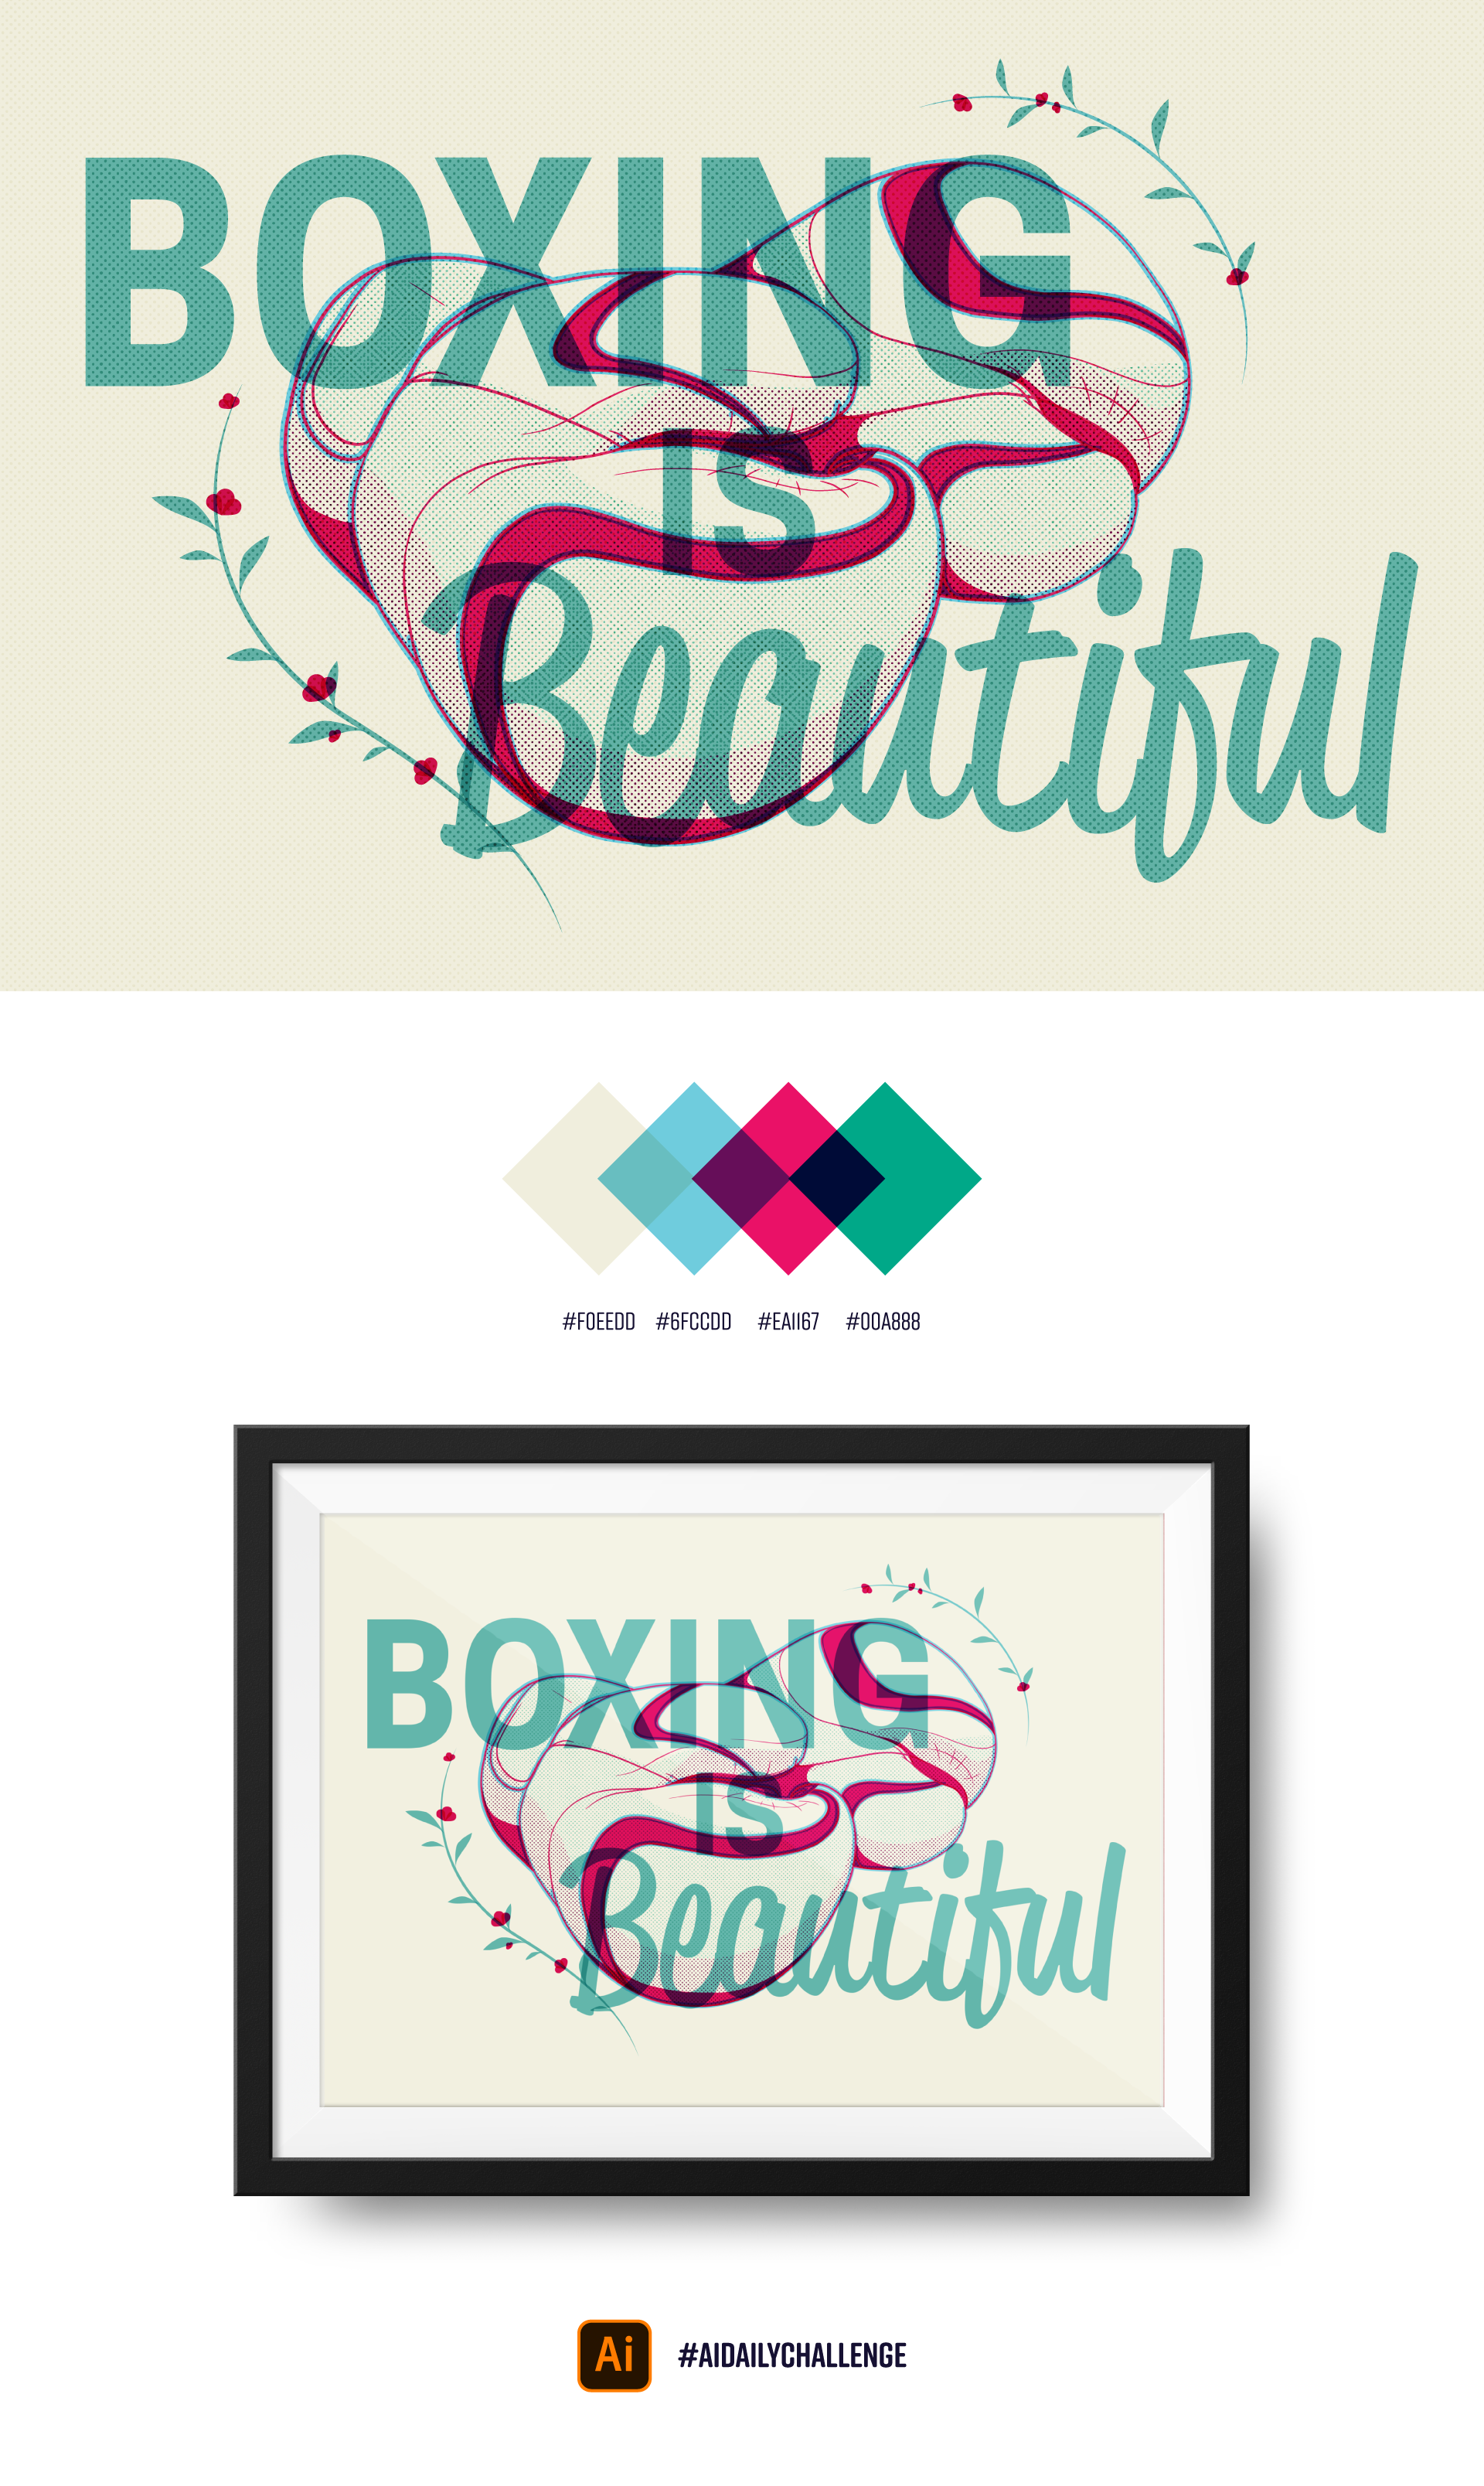 Poster design with an illustration of boxing gloves overlapping with the text "Boxing is Beautiful" in a halftone style with colors mixing.